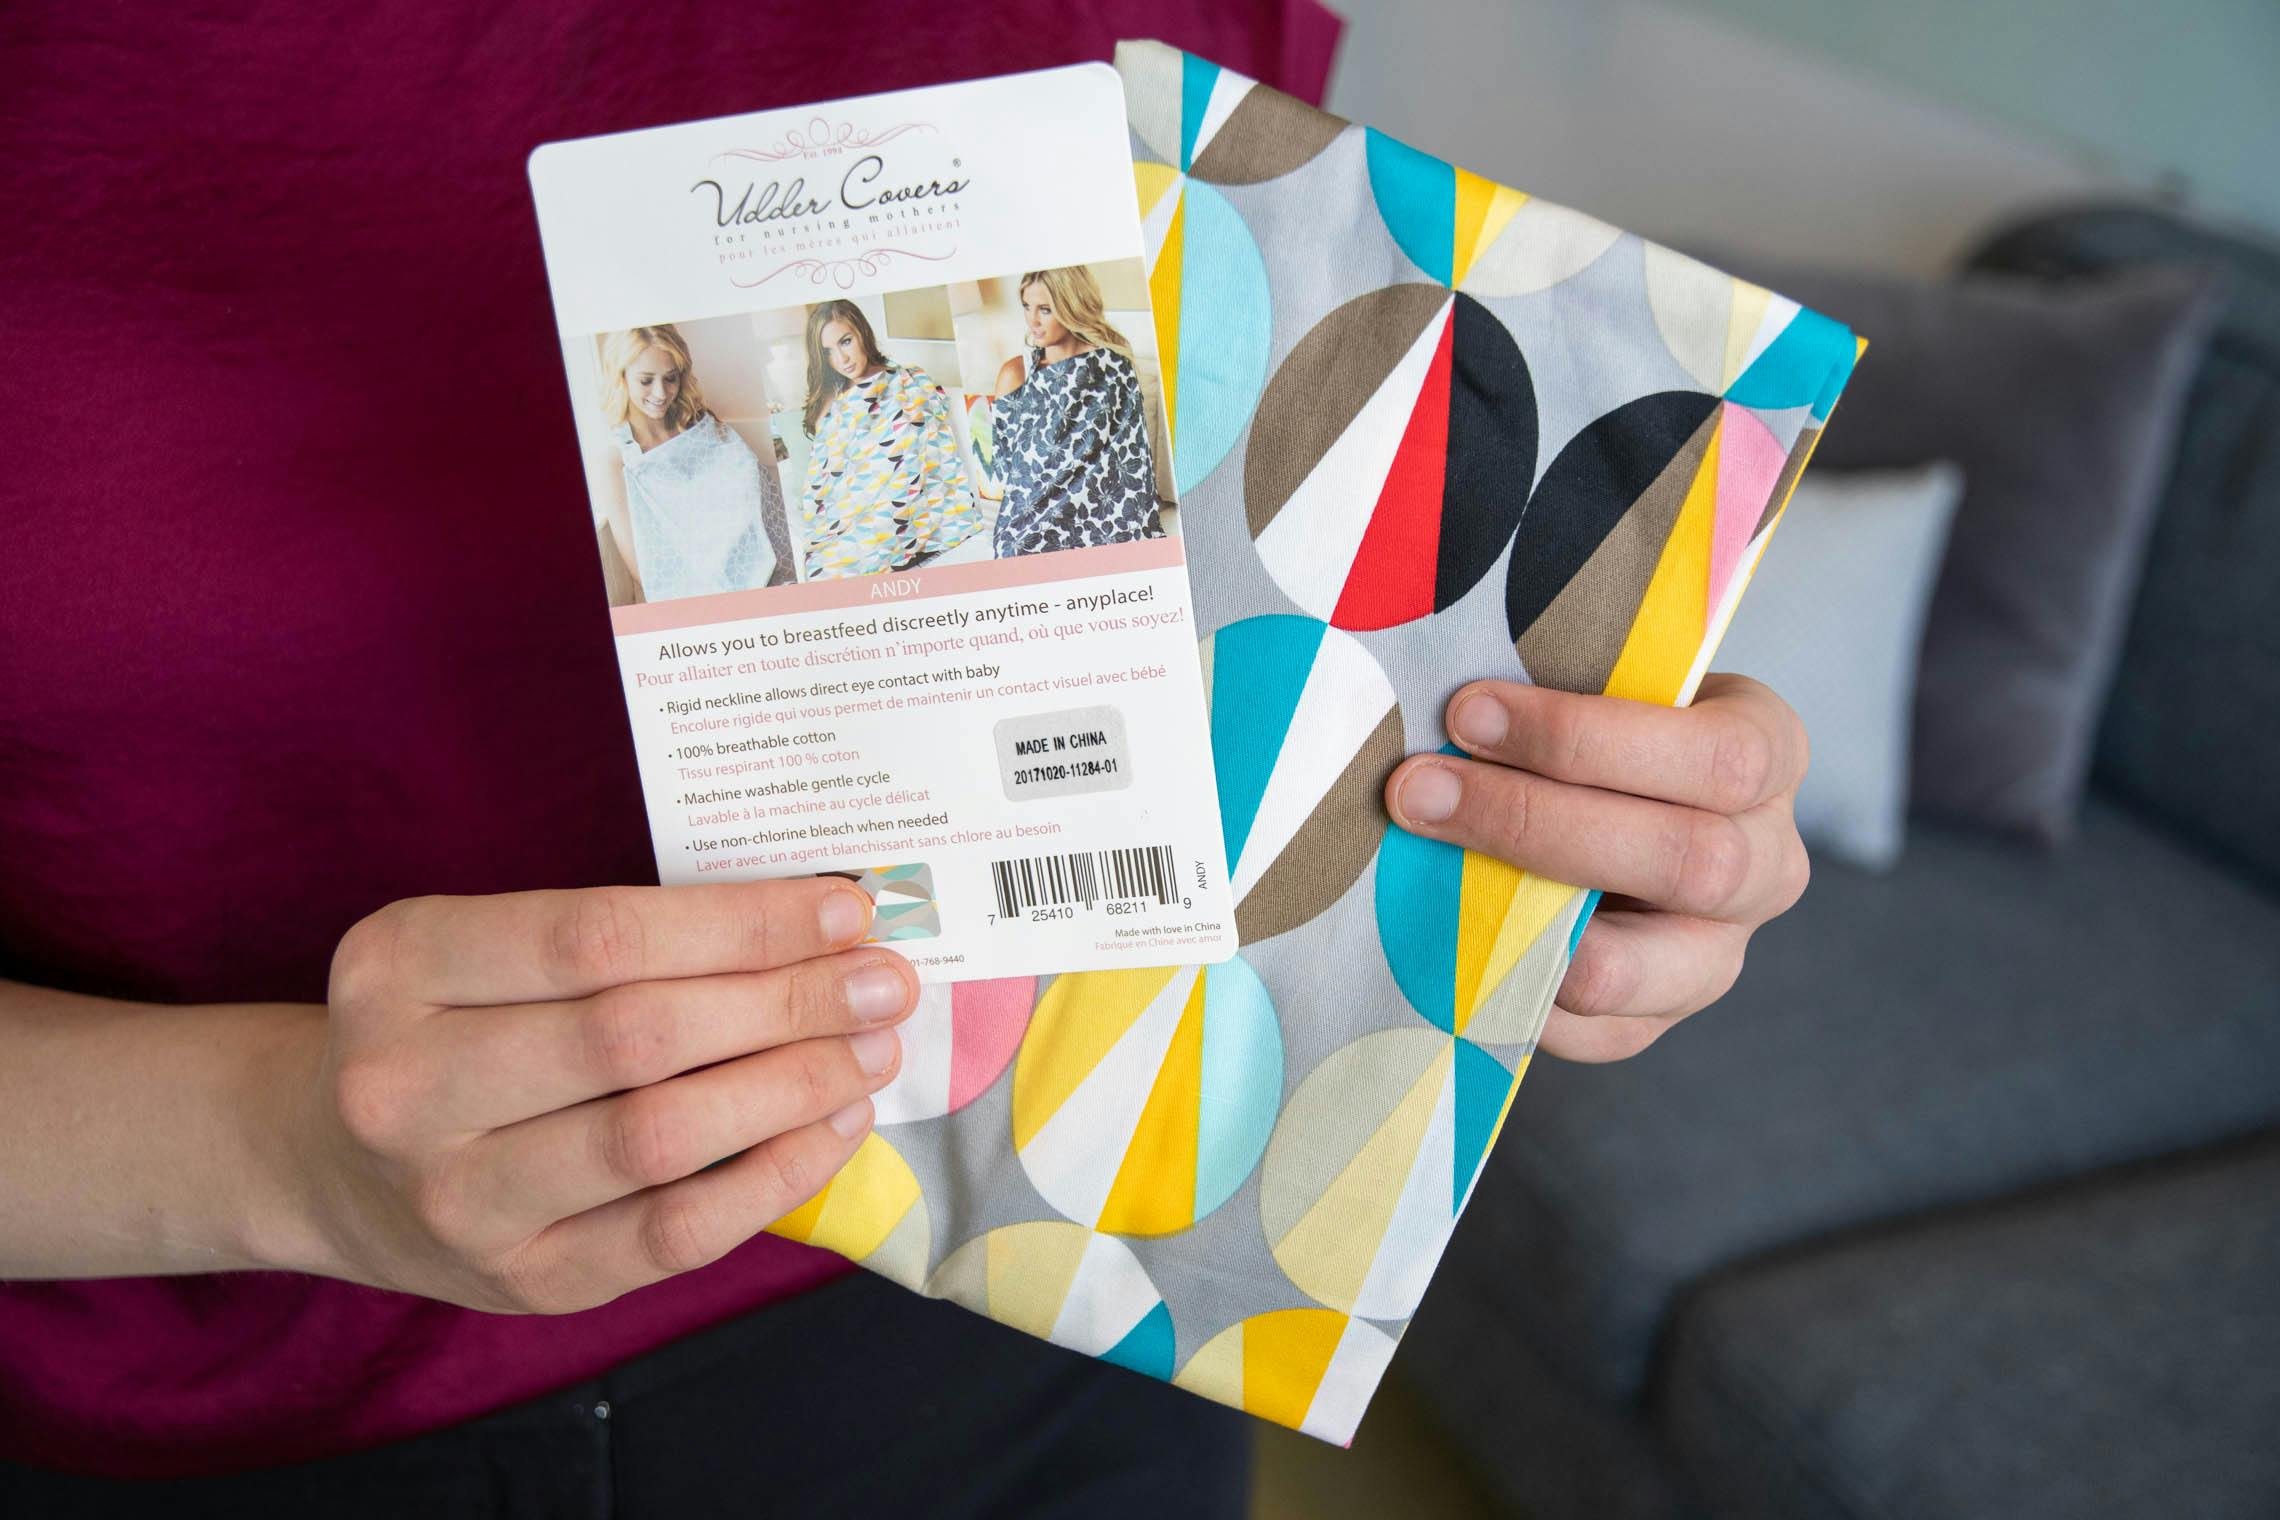 A person holding a nursing cover and card from Udder Covers.